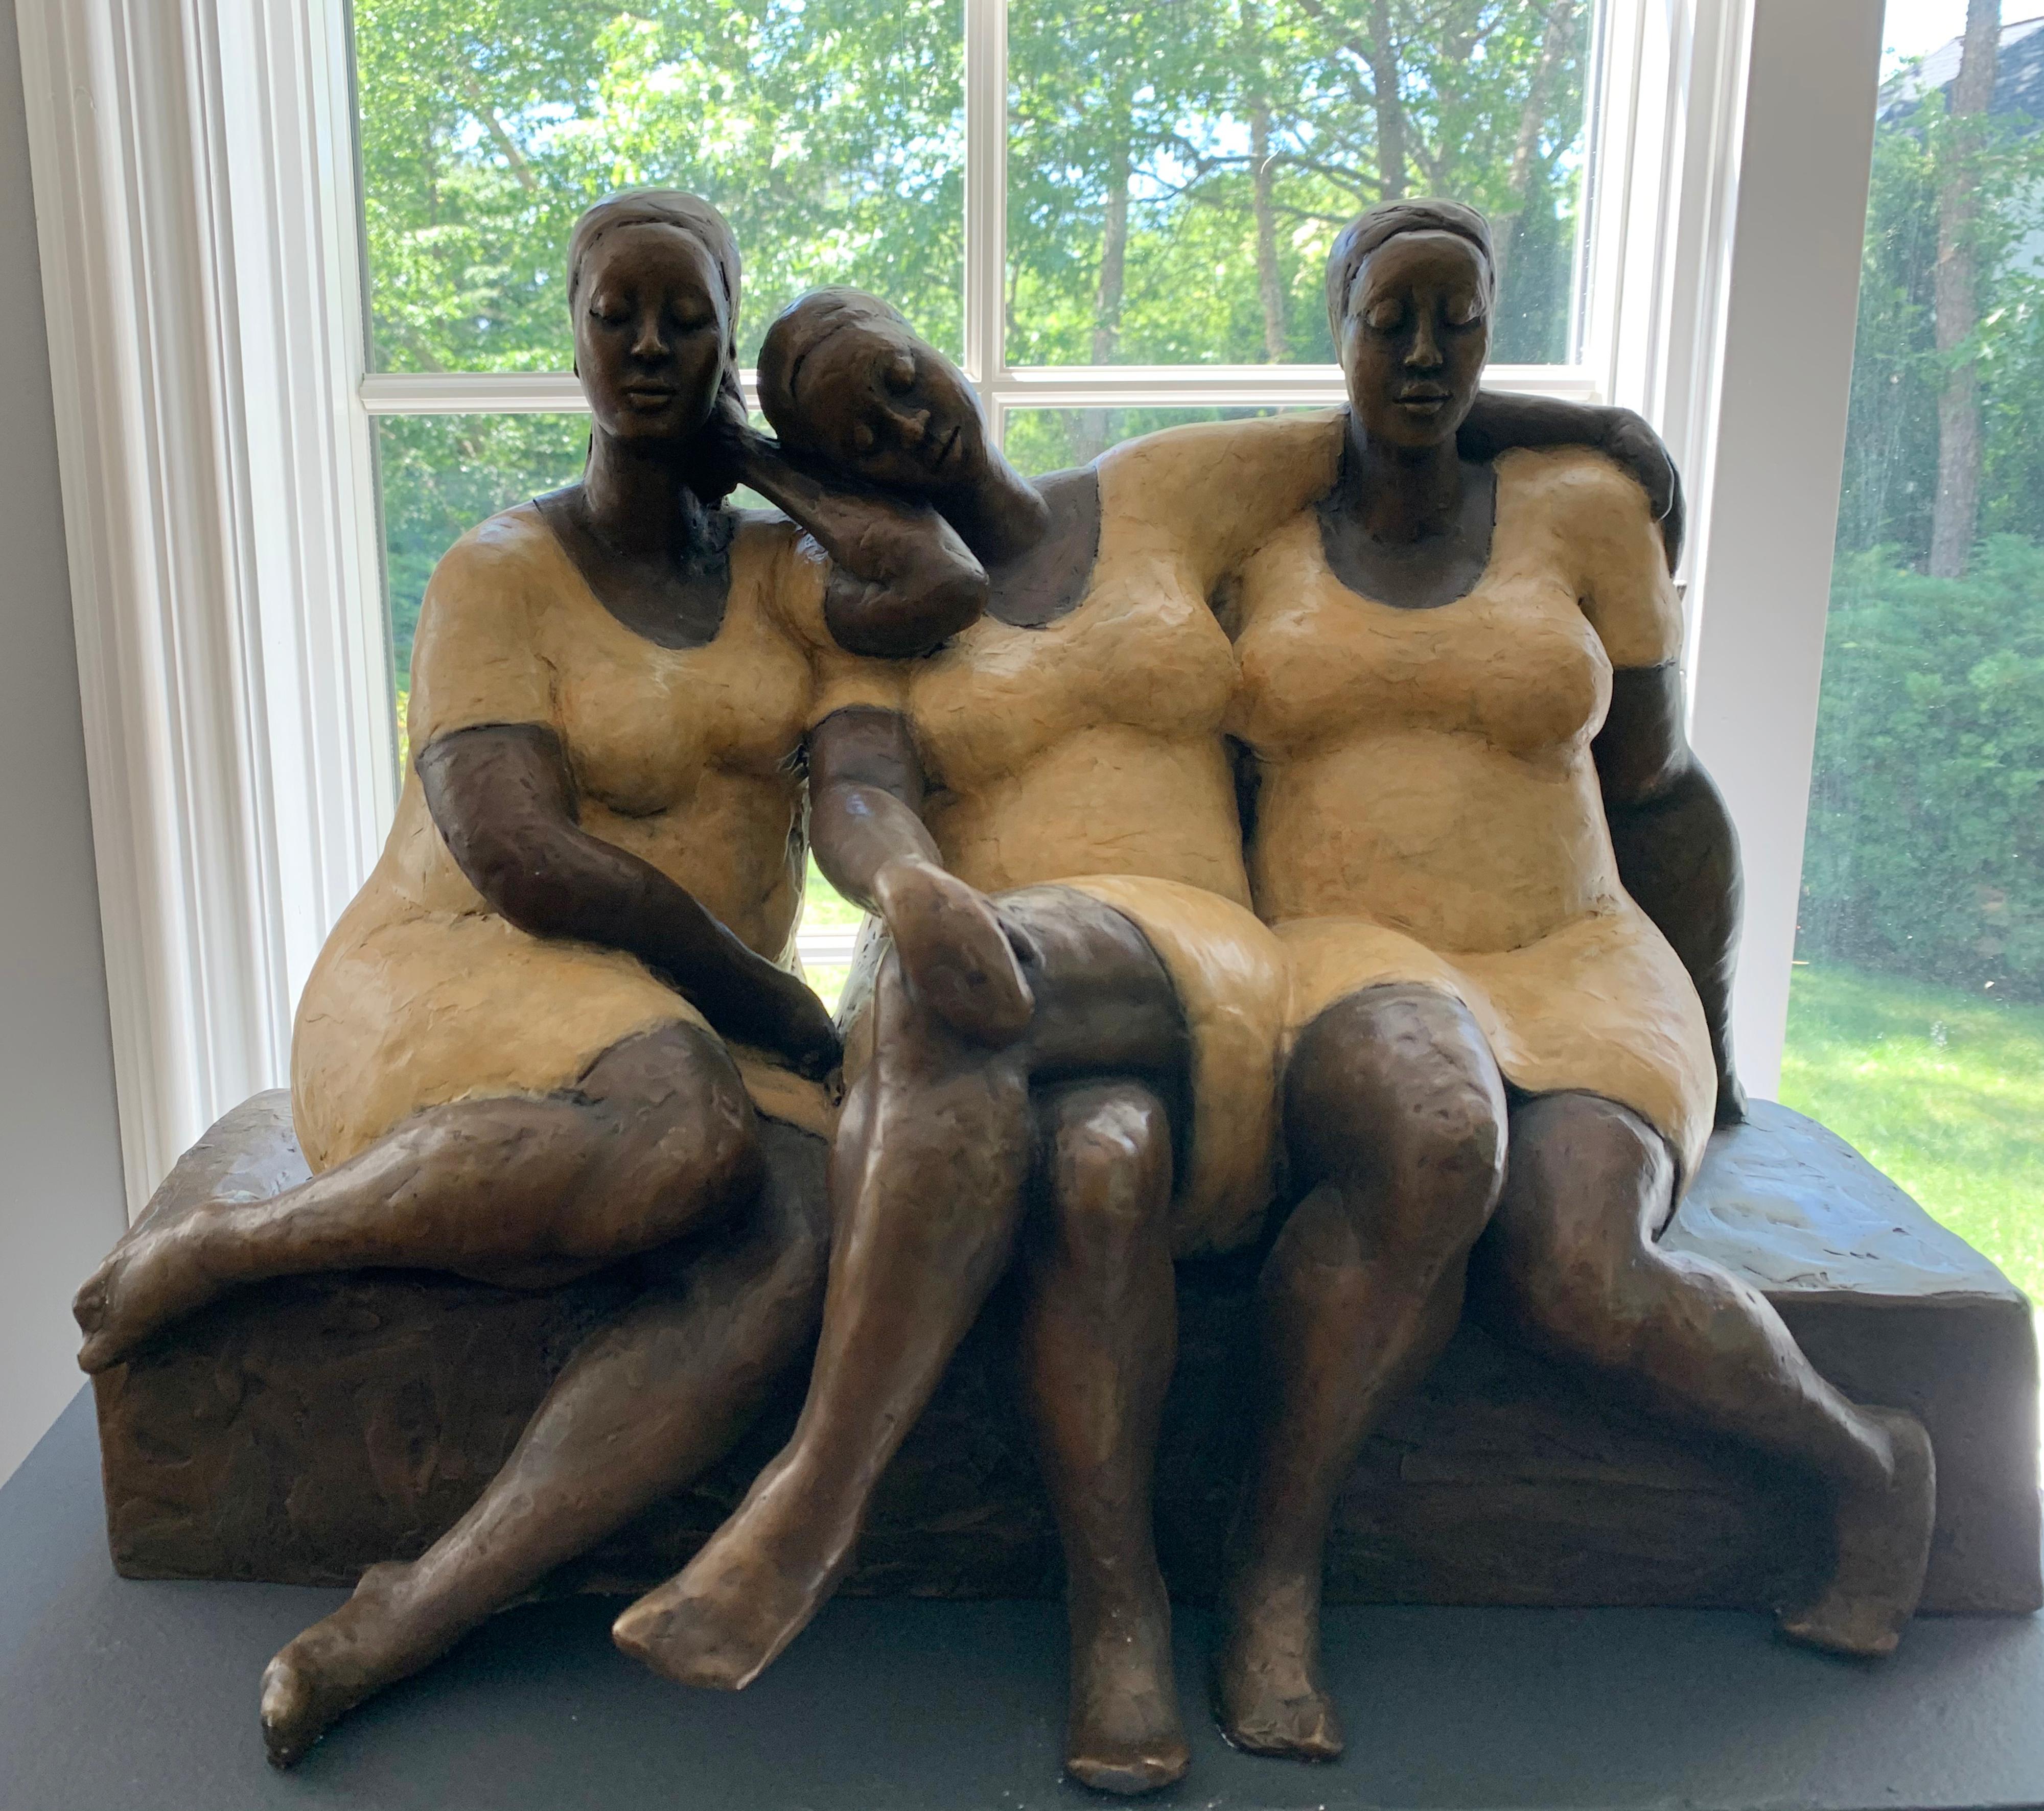 "Friends" Cast Bronze Sculpture with Patina and Lacquer Finish